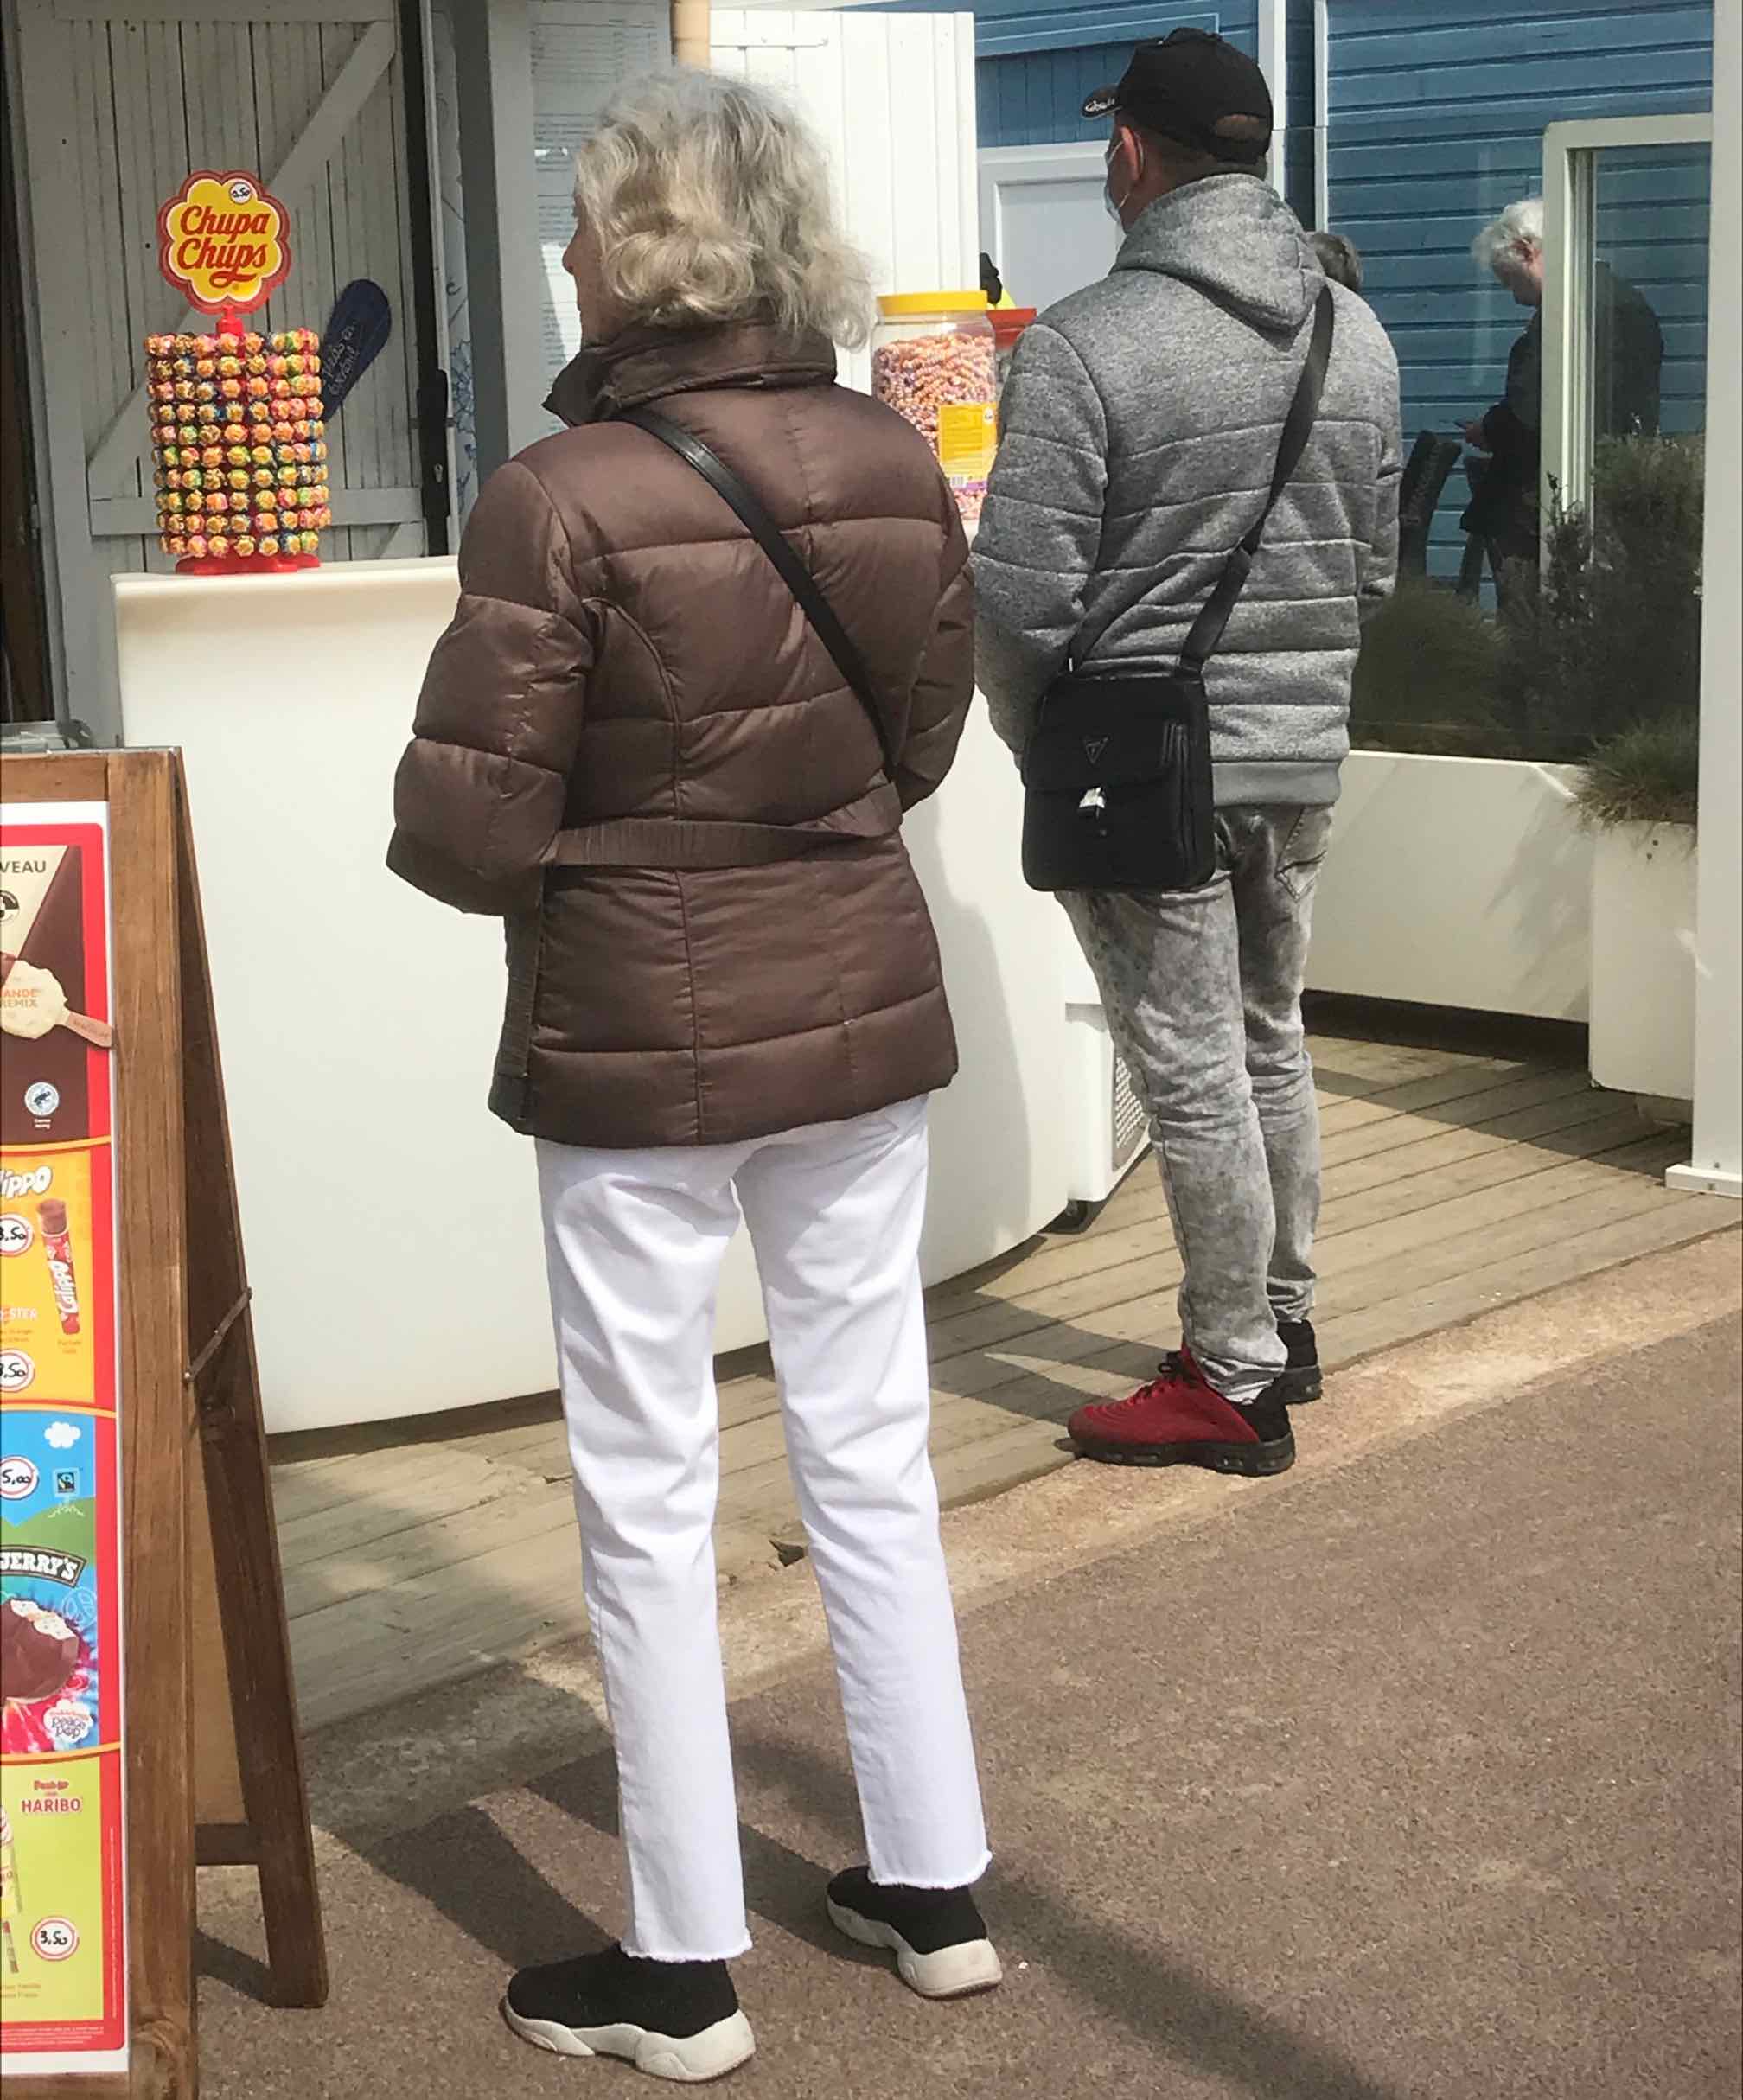 woman and man in line to buy French ice cream